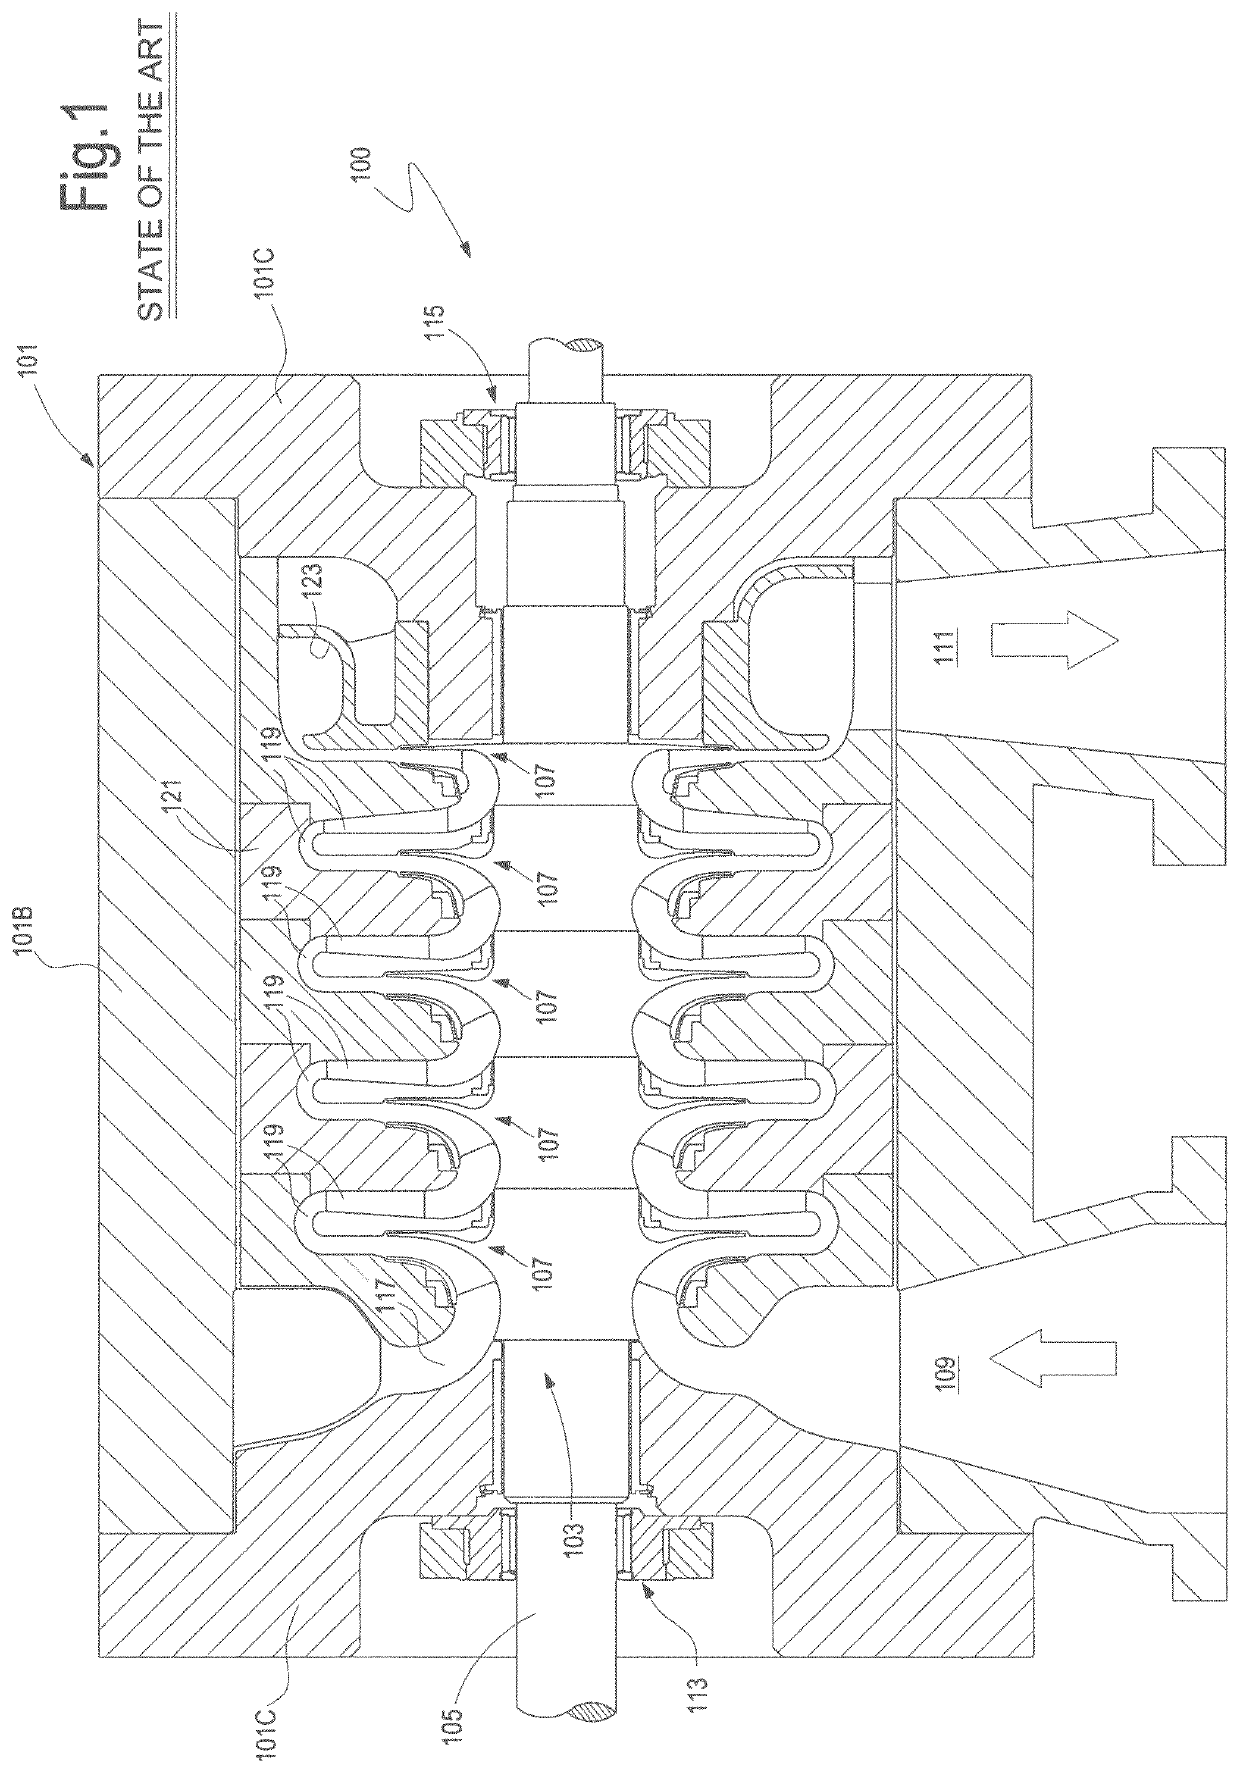 Compressor with a thermal shield and methods of operation